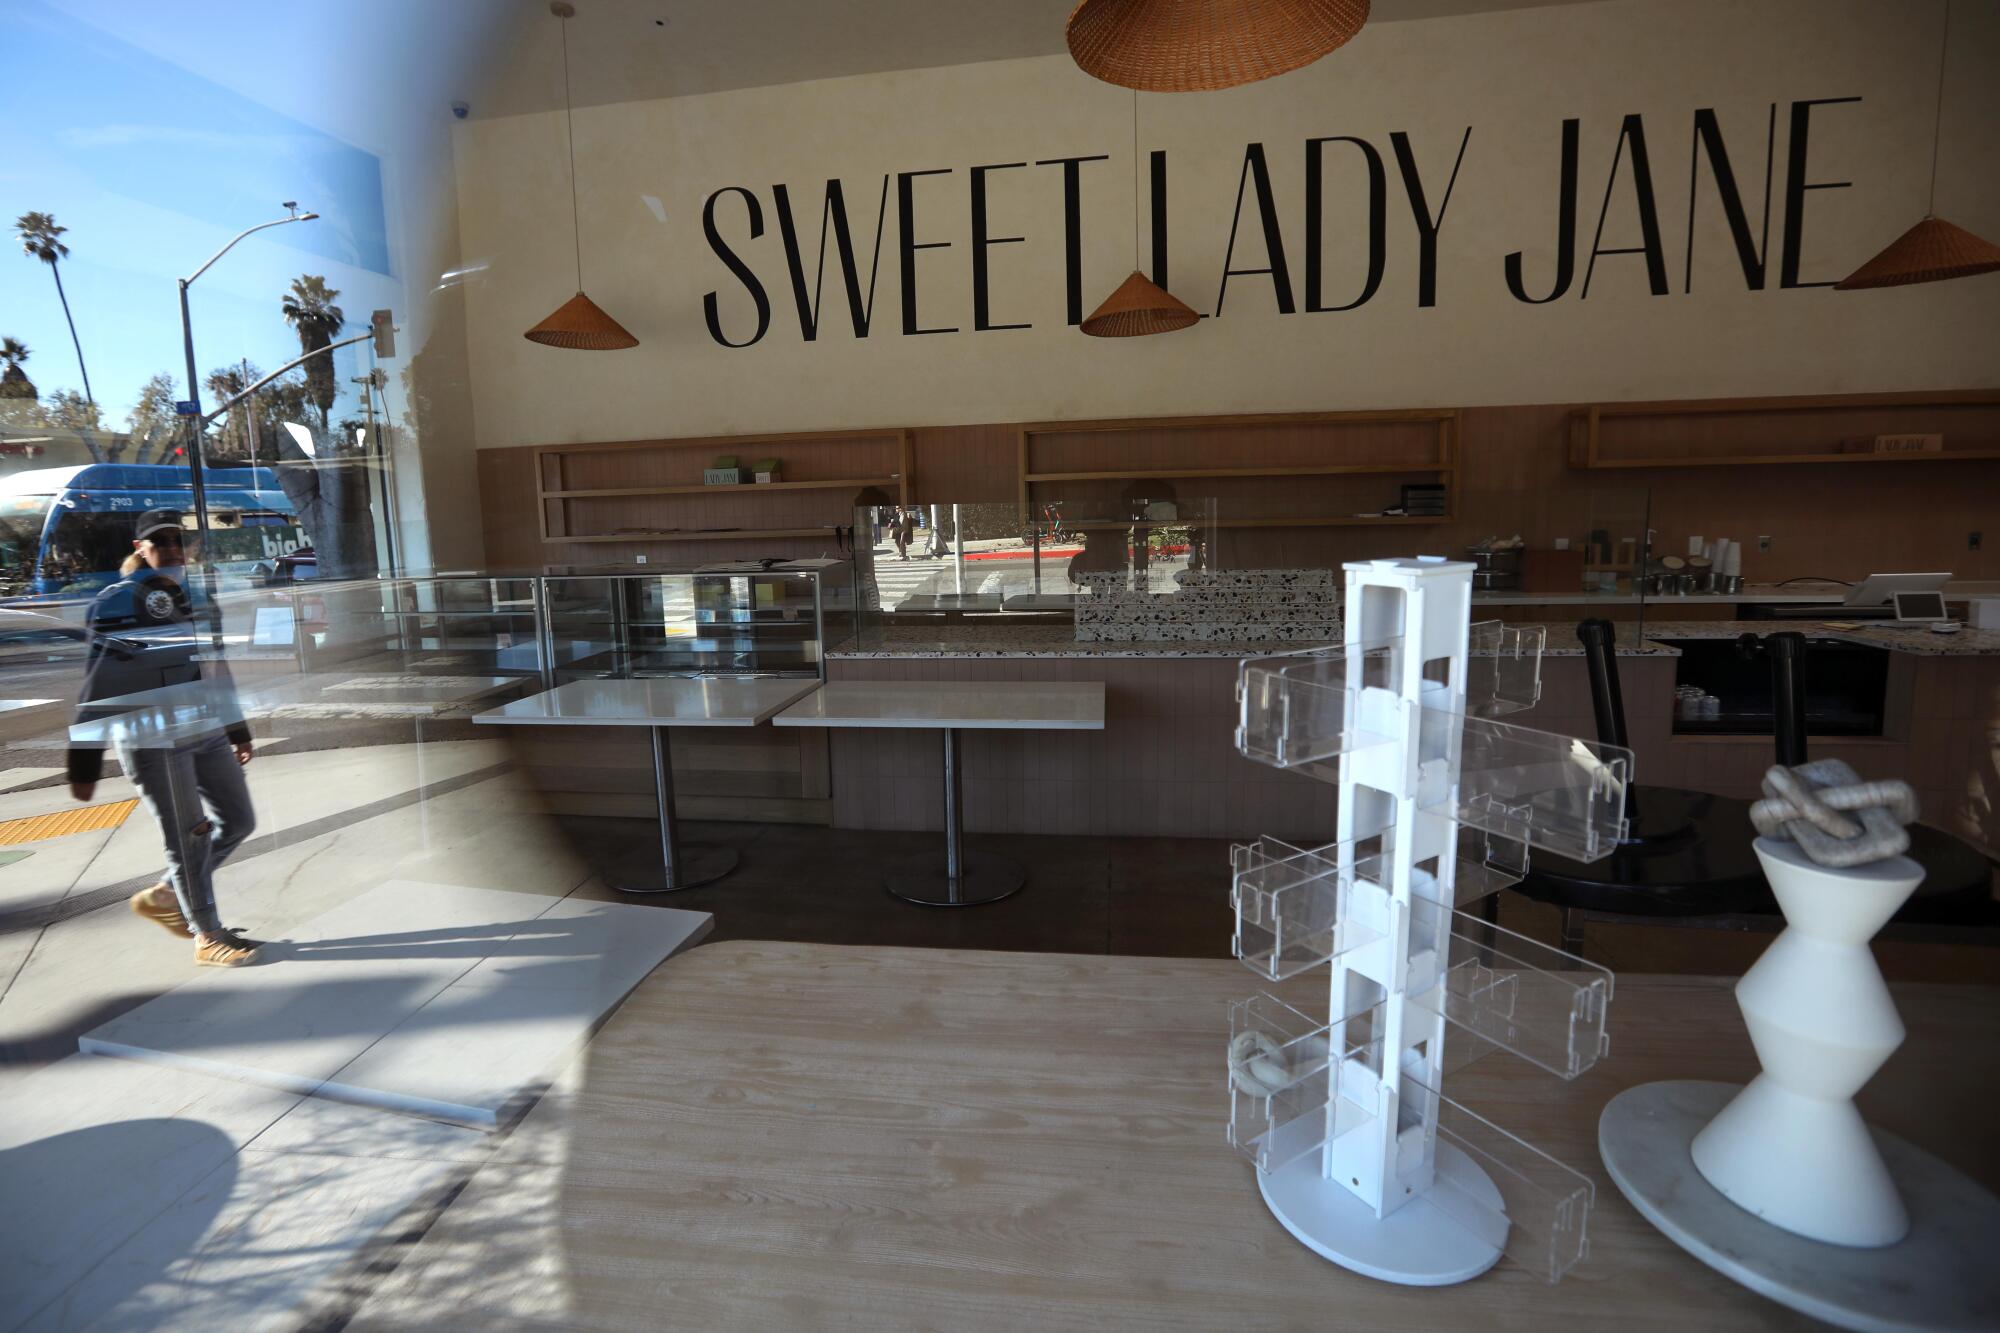 A pedestrian, reflected in the window at Sweet Lady Jane walks past the shuttered bakery in Santa Monica.